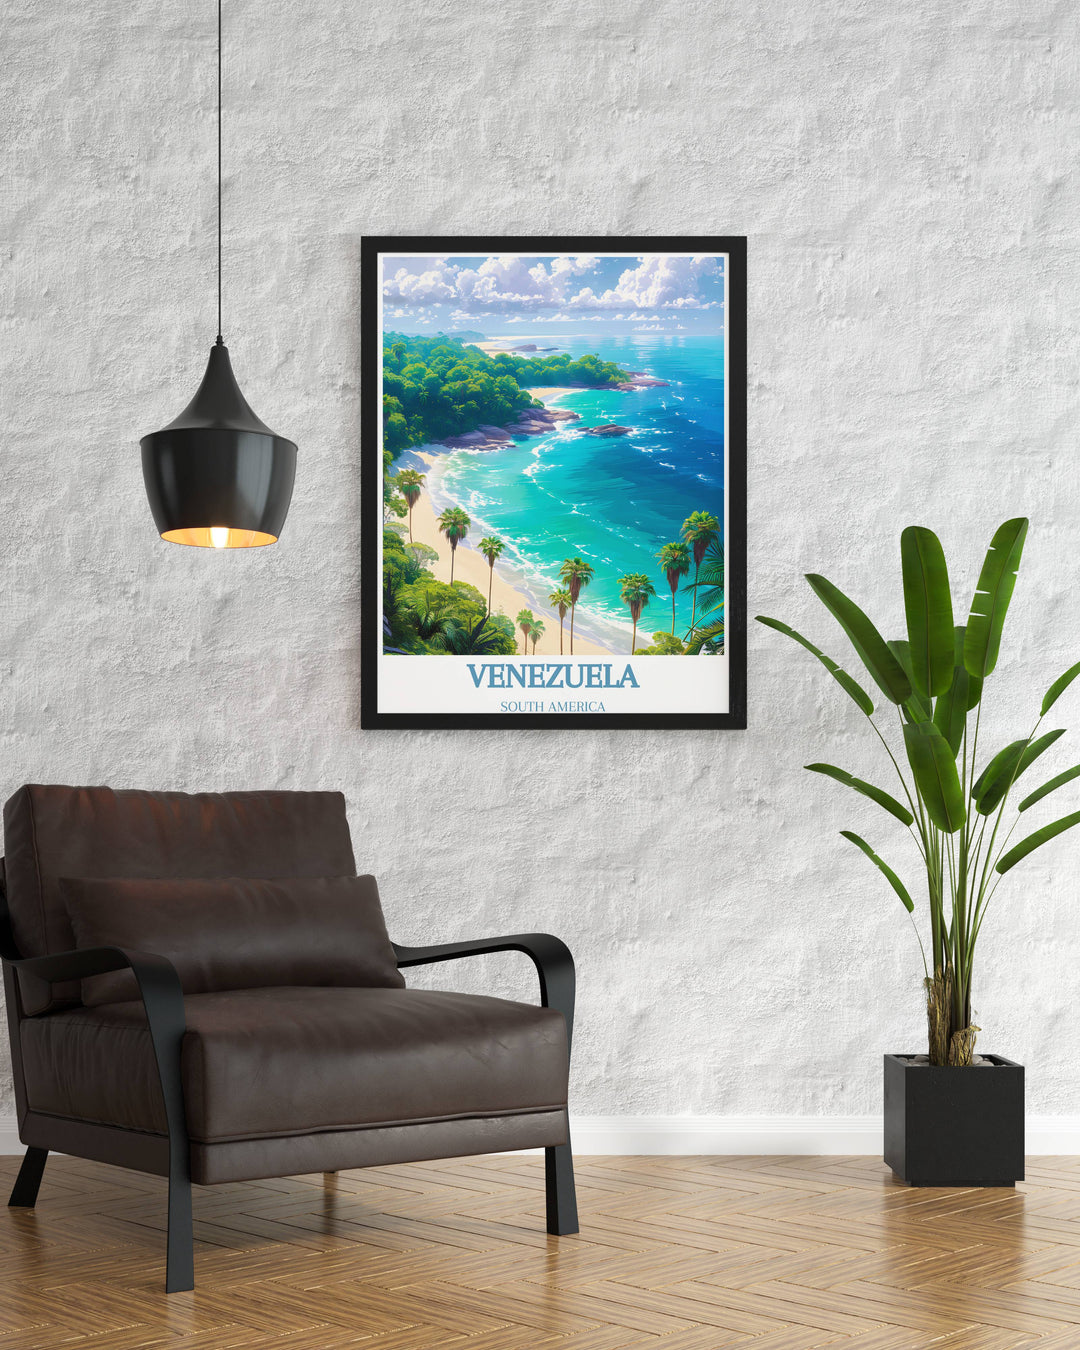 Morrocoy National Park travel poster, illustrating the serene beaches and lush greenery, ideal for adding a touch of tropical beauty to your living space.